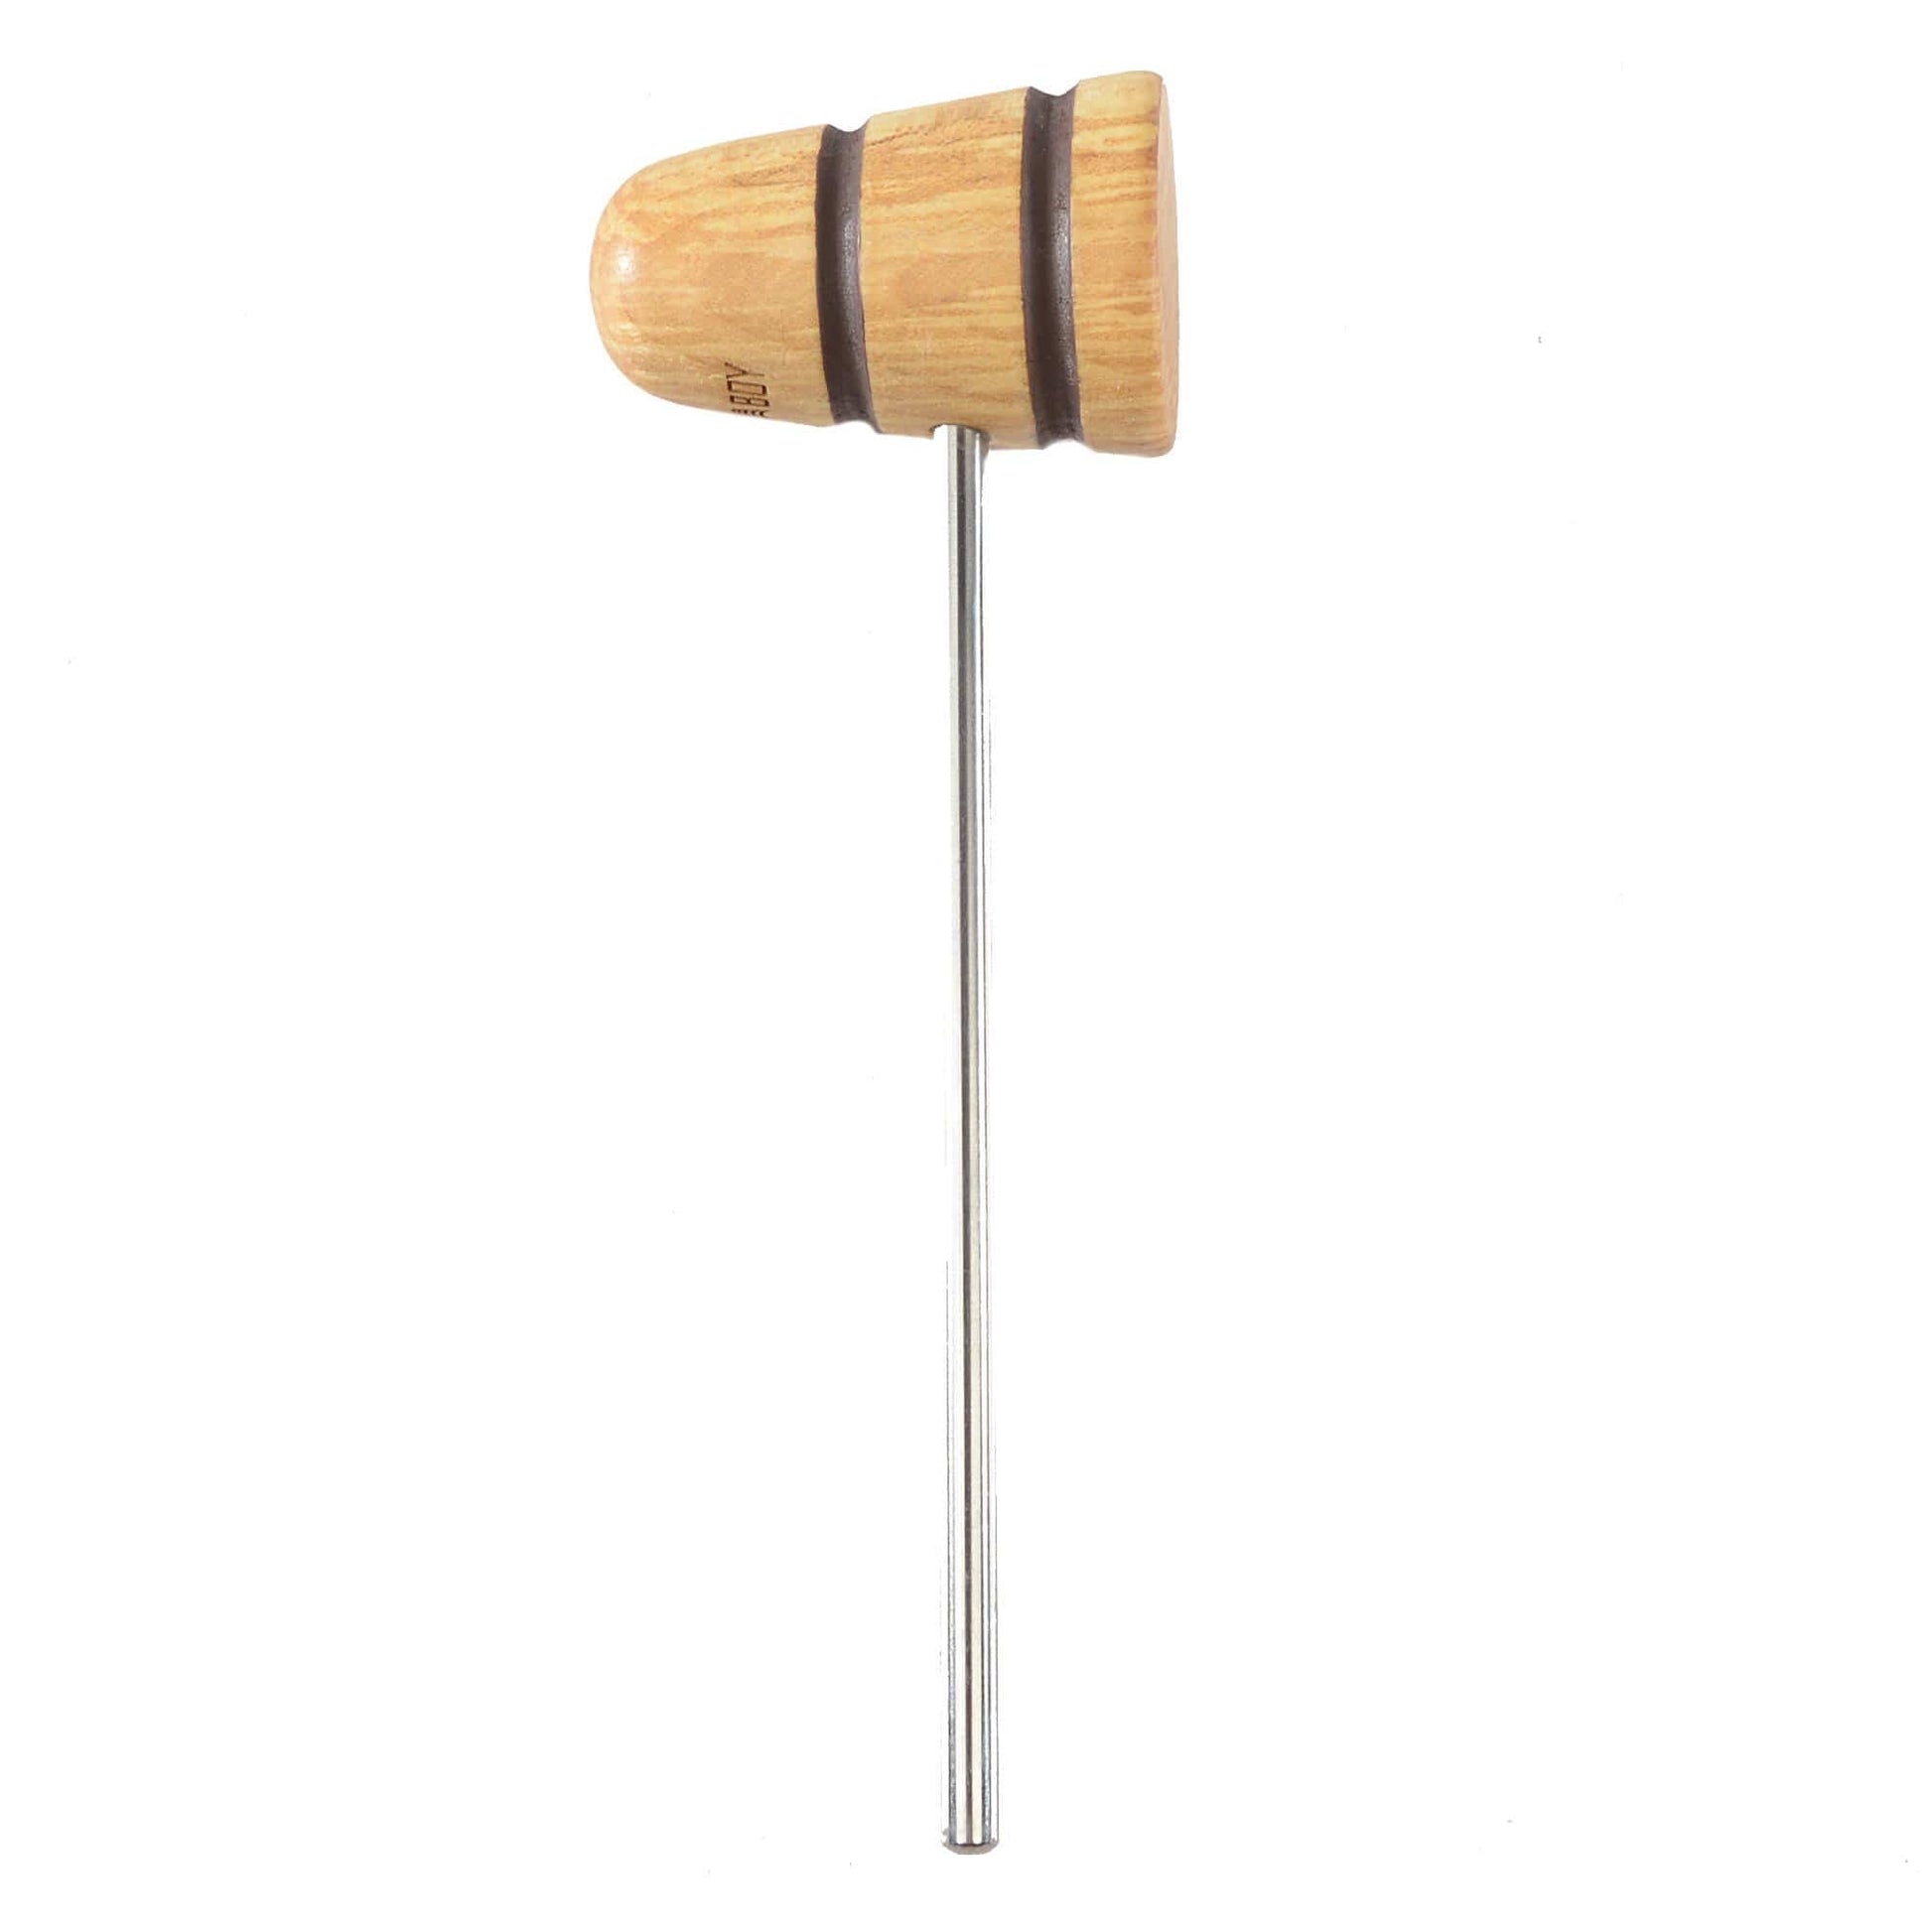 Low Boy Standard Wood Bass Drum Beater Natural w/Brown Stripes Drums and Percussion / Parts and Accessories / Heads